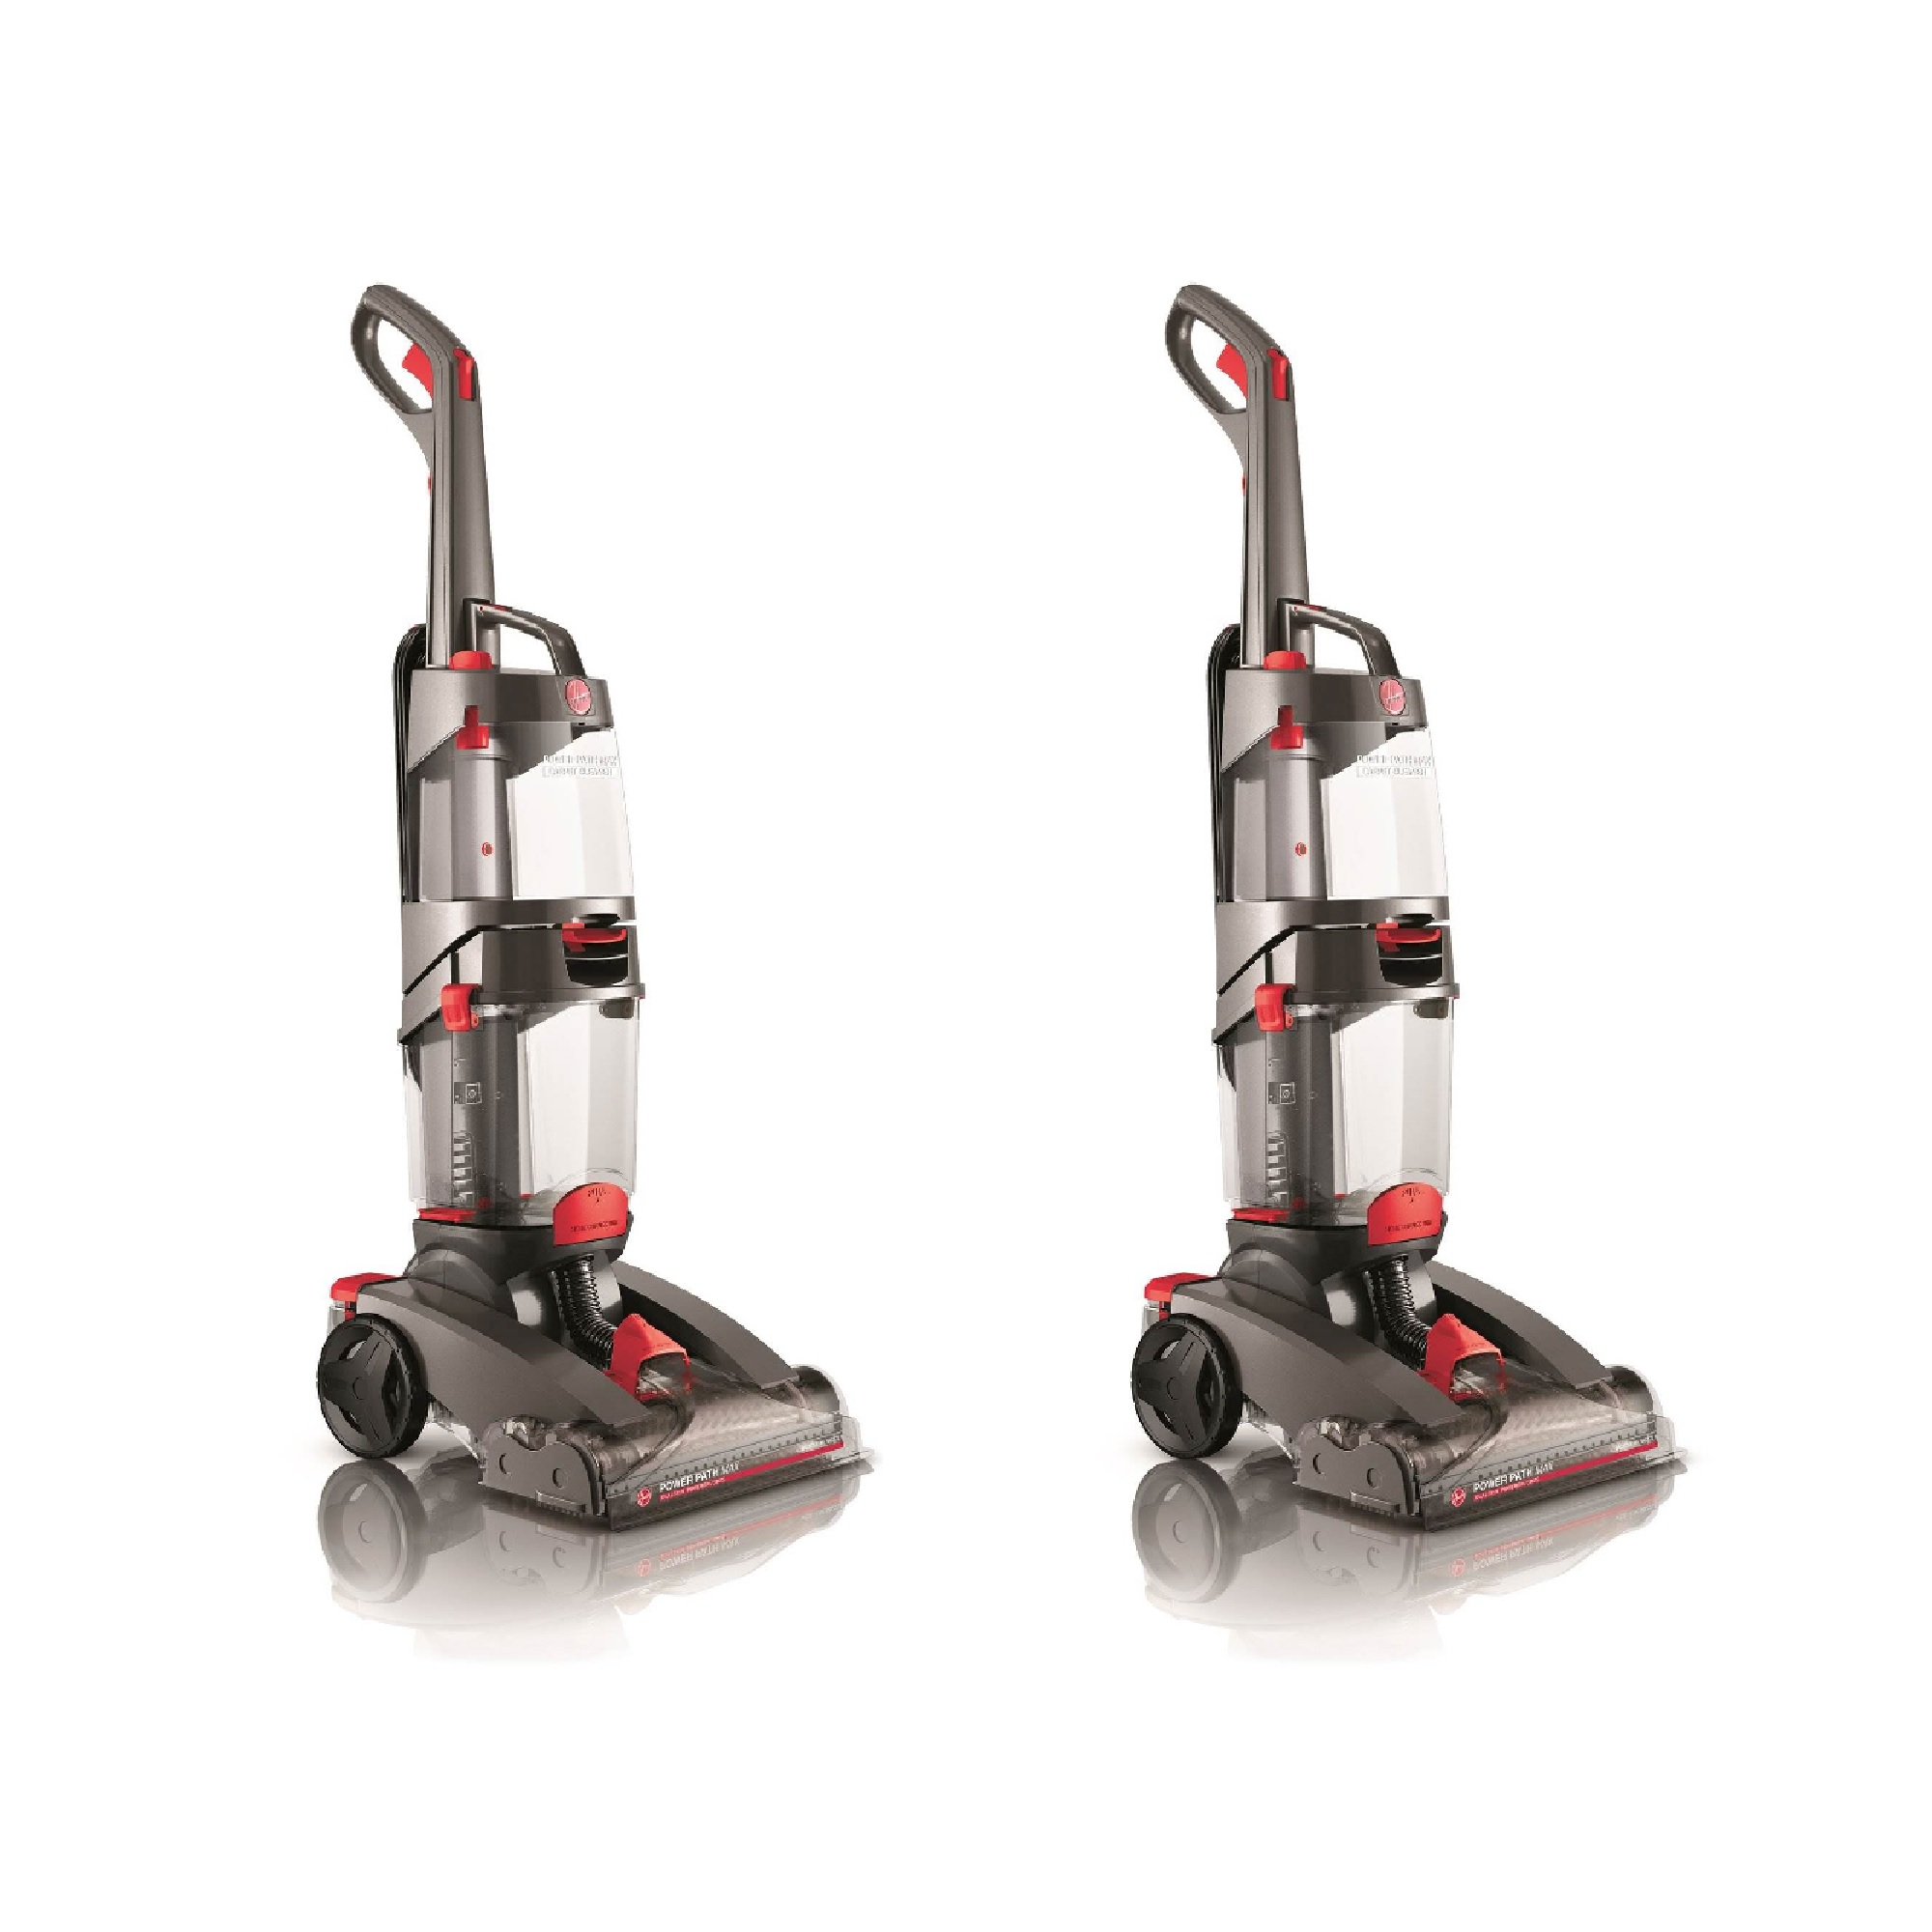 Hoover 1 Gallon Dual Power Path Max Advanced Pet Upright Carpet Cleaner (2 Pack) eBay